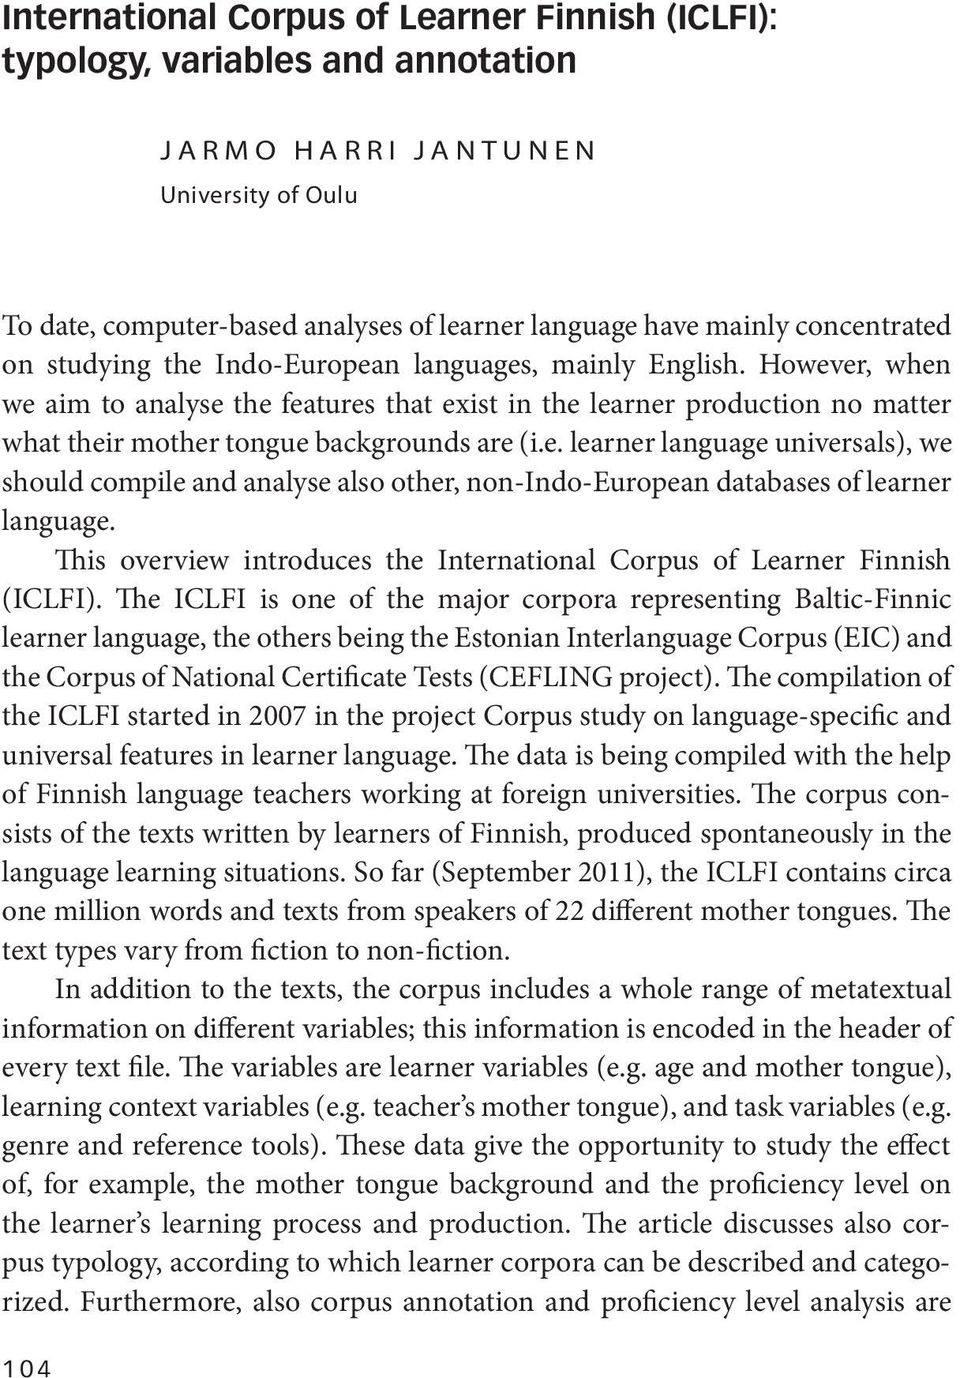 However, when we aim to analyse the features that exist in the learner production no matter what their mother tongue backgrounds are (i.e. learner language universals), we should compile and analyse also other, non-indo-european databases of learner language.